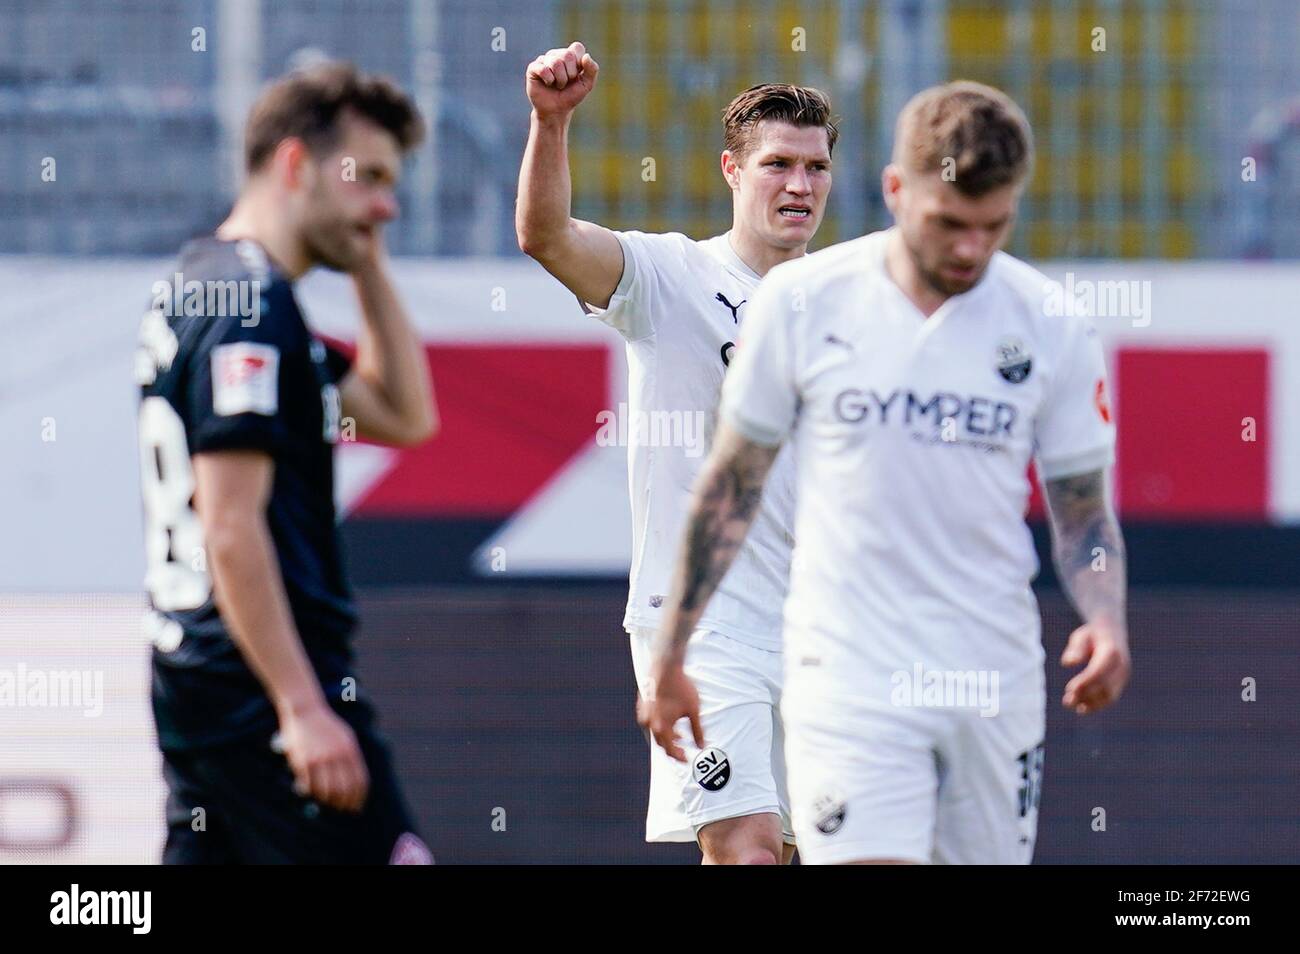 Sandhausen, Germany. 04th Apr, 2021. Football: 2nd Bundesliga, SV Sandhausen - Würzburger Kickers, Matchday 27, Hardtwaldstadion. Sandhausen's goal scorer Kevin Behrens (centre) celebrates the penalty goal for 1:0. Credit: Uwe Anspach/dpa - IMPORTANT NOTE: In accordance with the regulations of the DFL Deutsche Fußball Liga and/or the DFB Deutscher Fußball-Bund, it is prohibited to use or have used photographs taken in the stadium and/or of the match in the form of sequence pictures and/or video-like photo series./dpa/Alamy Live News Stock Photo